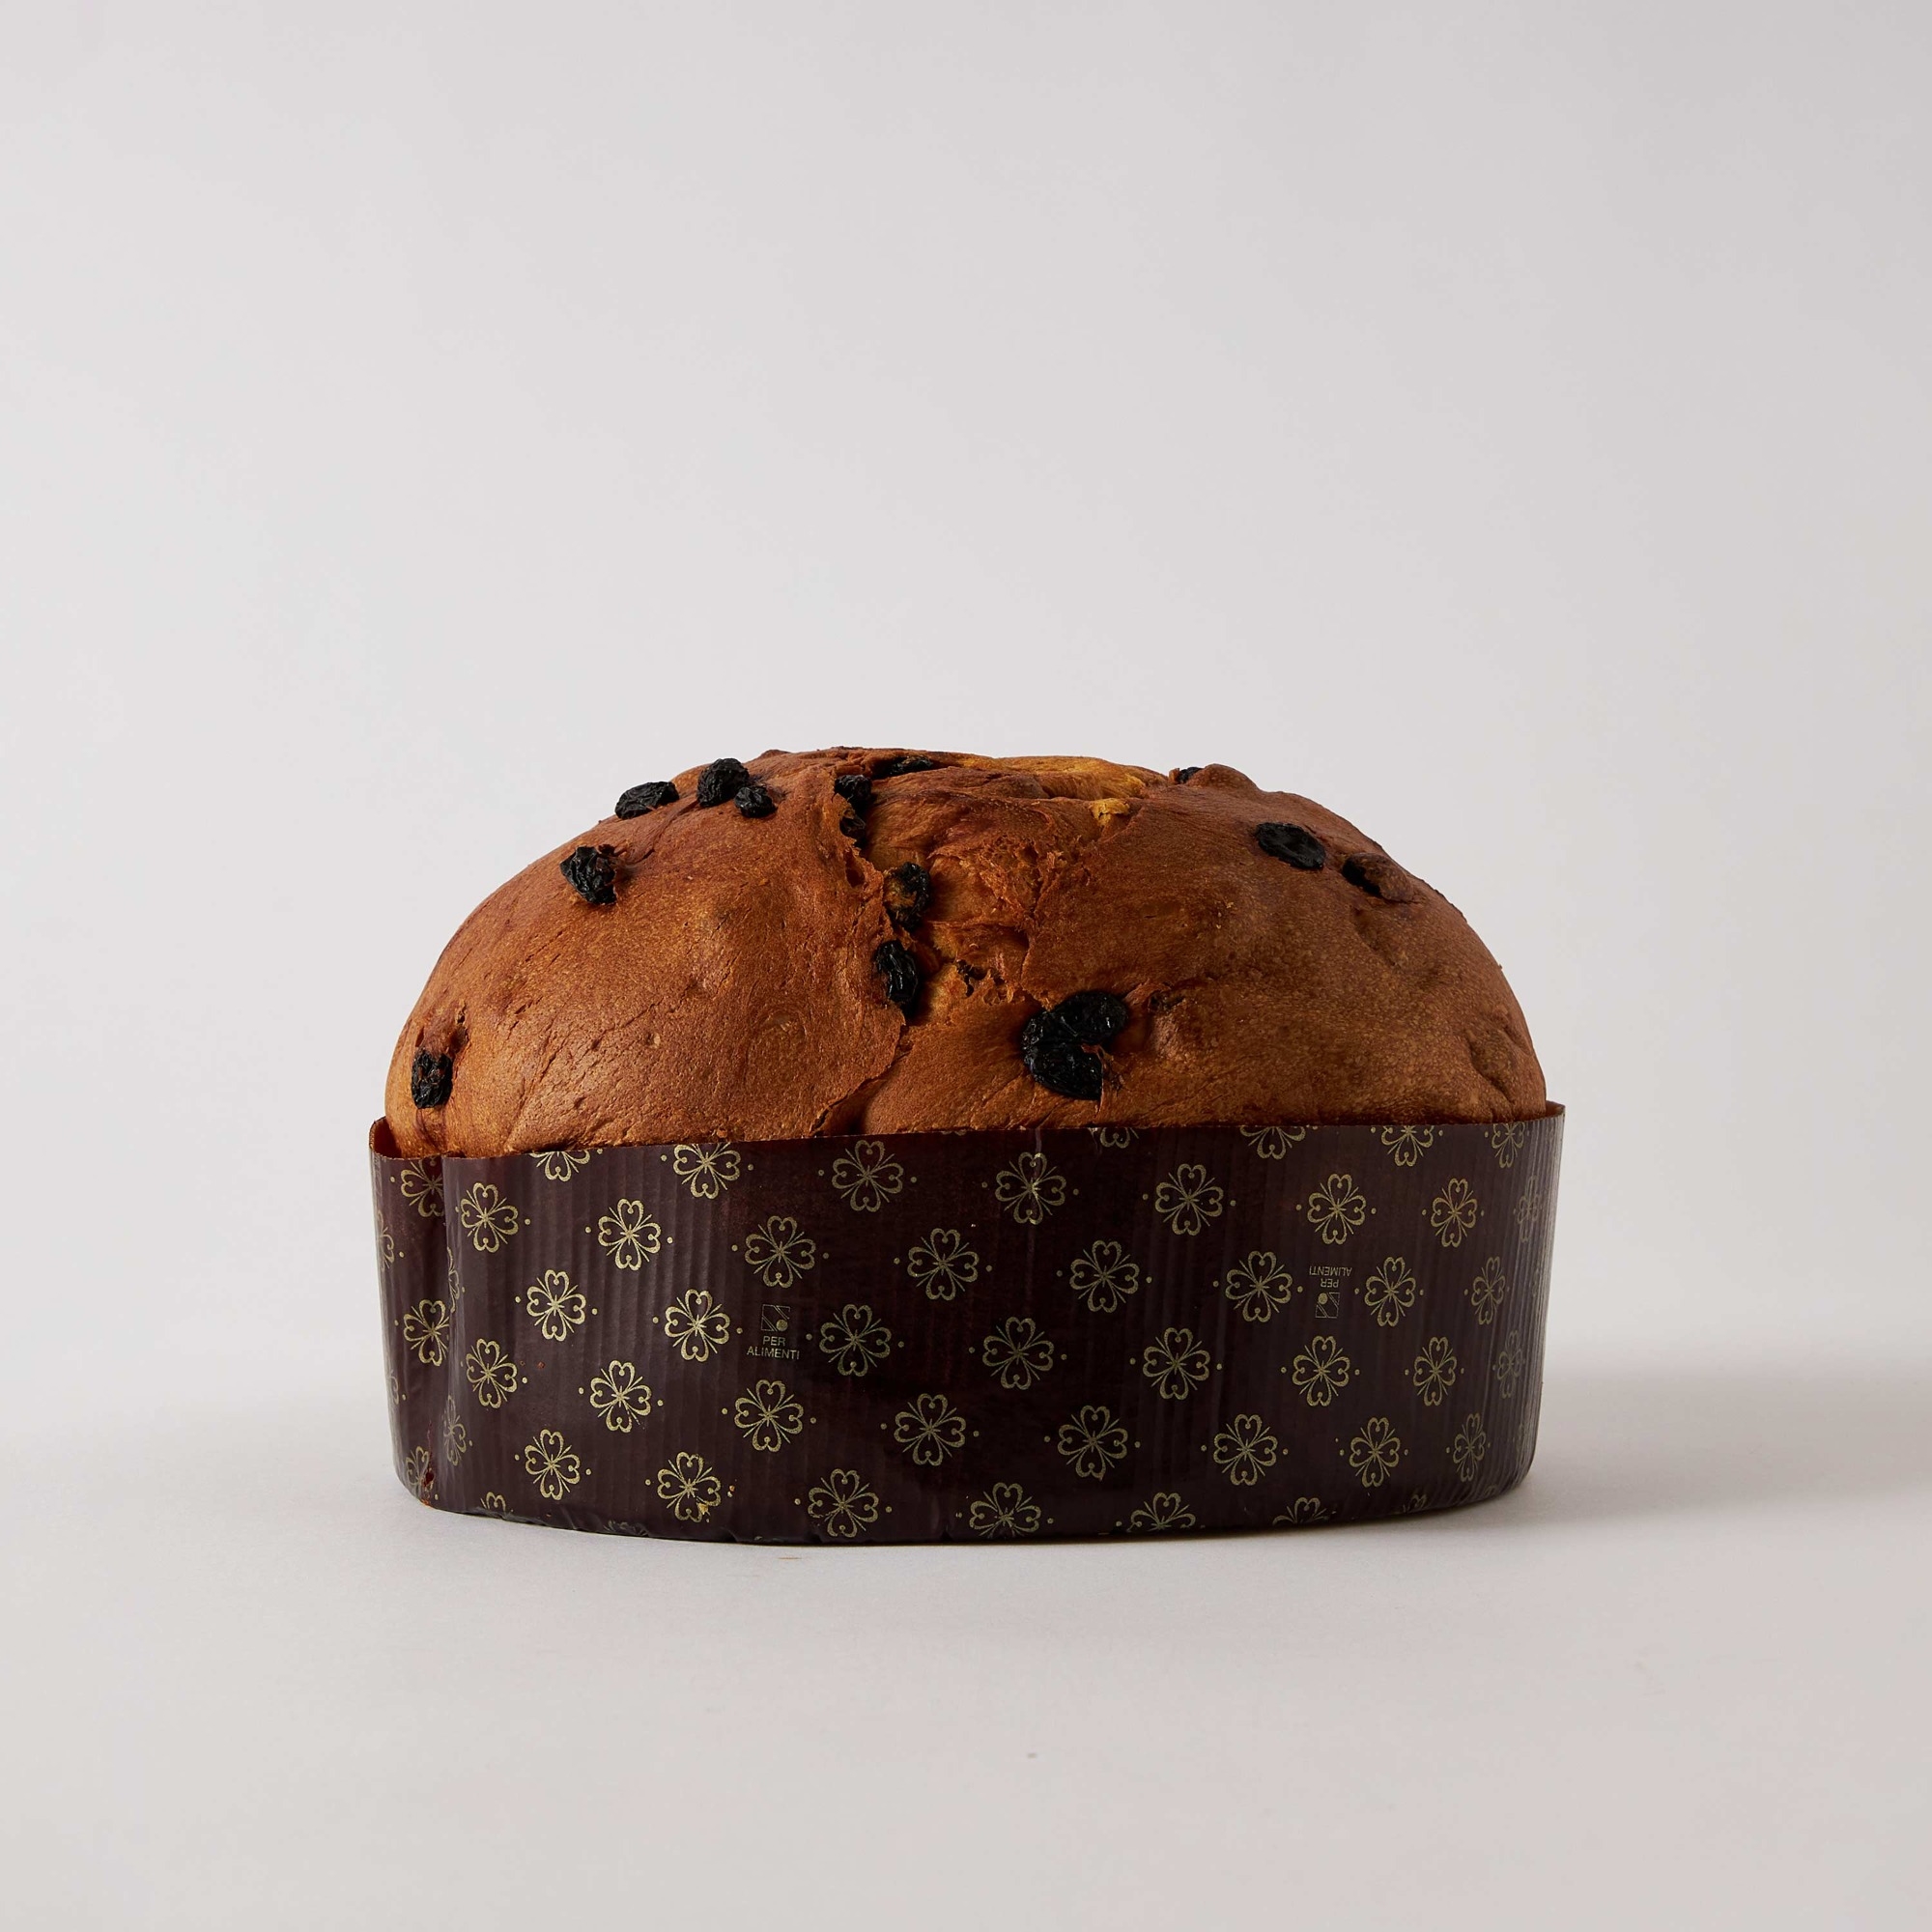 Cipriani handverpackte Panettone